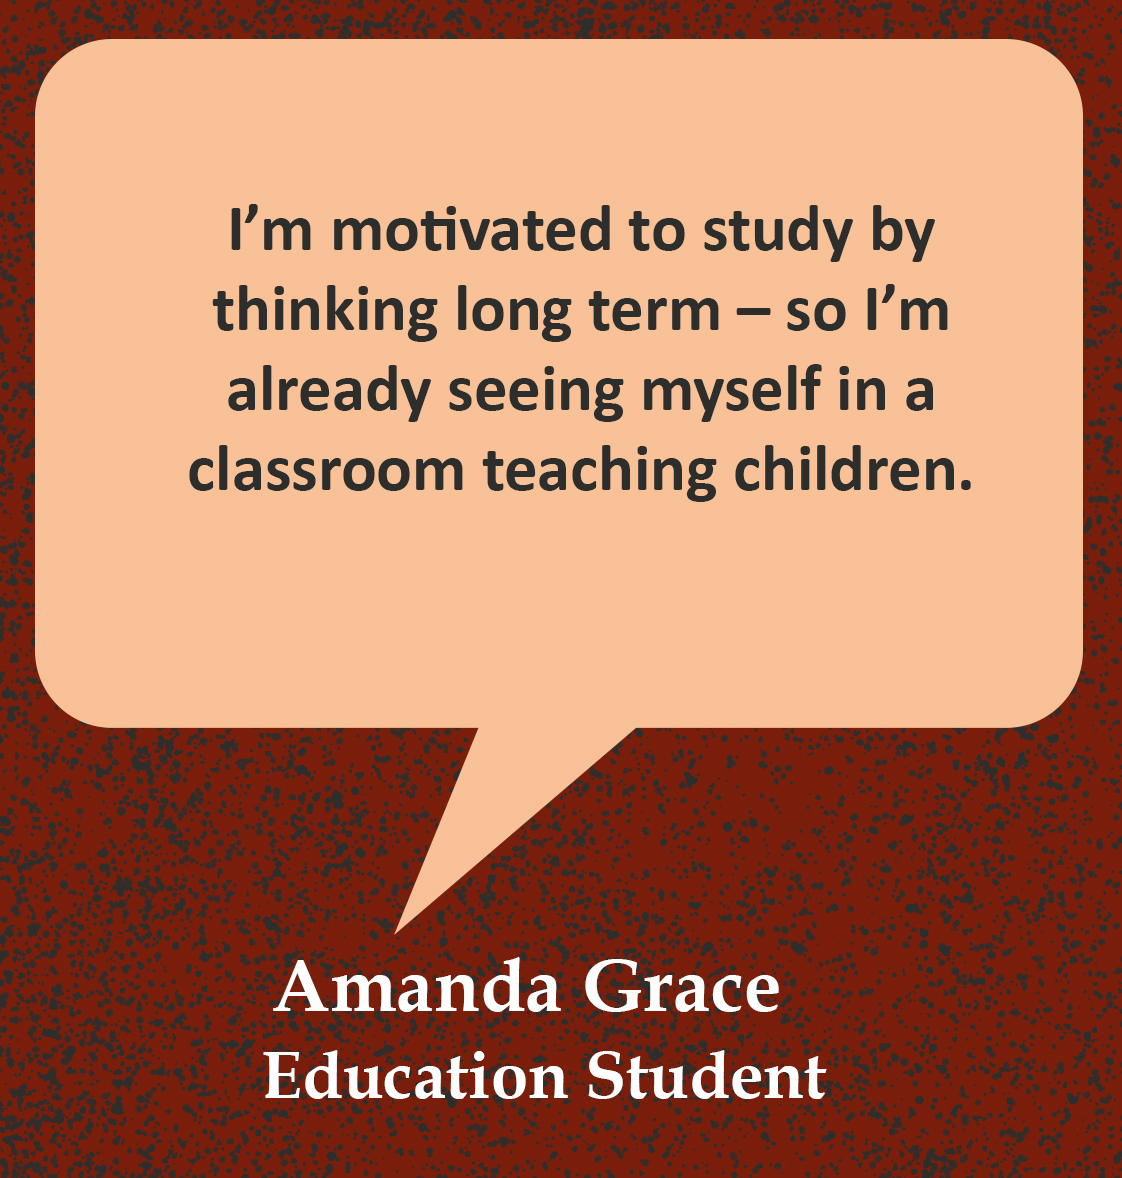 Quote in speech bubble, "I’m motivated to study by thinking long term – so I’m already seeing myself in a classroom teaching children." Quote from Amanda Grace, Education student "